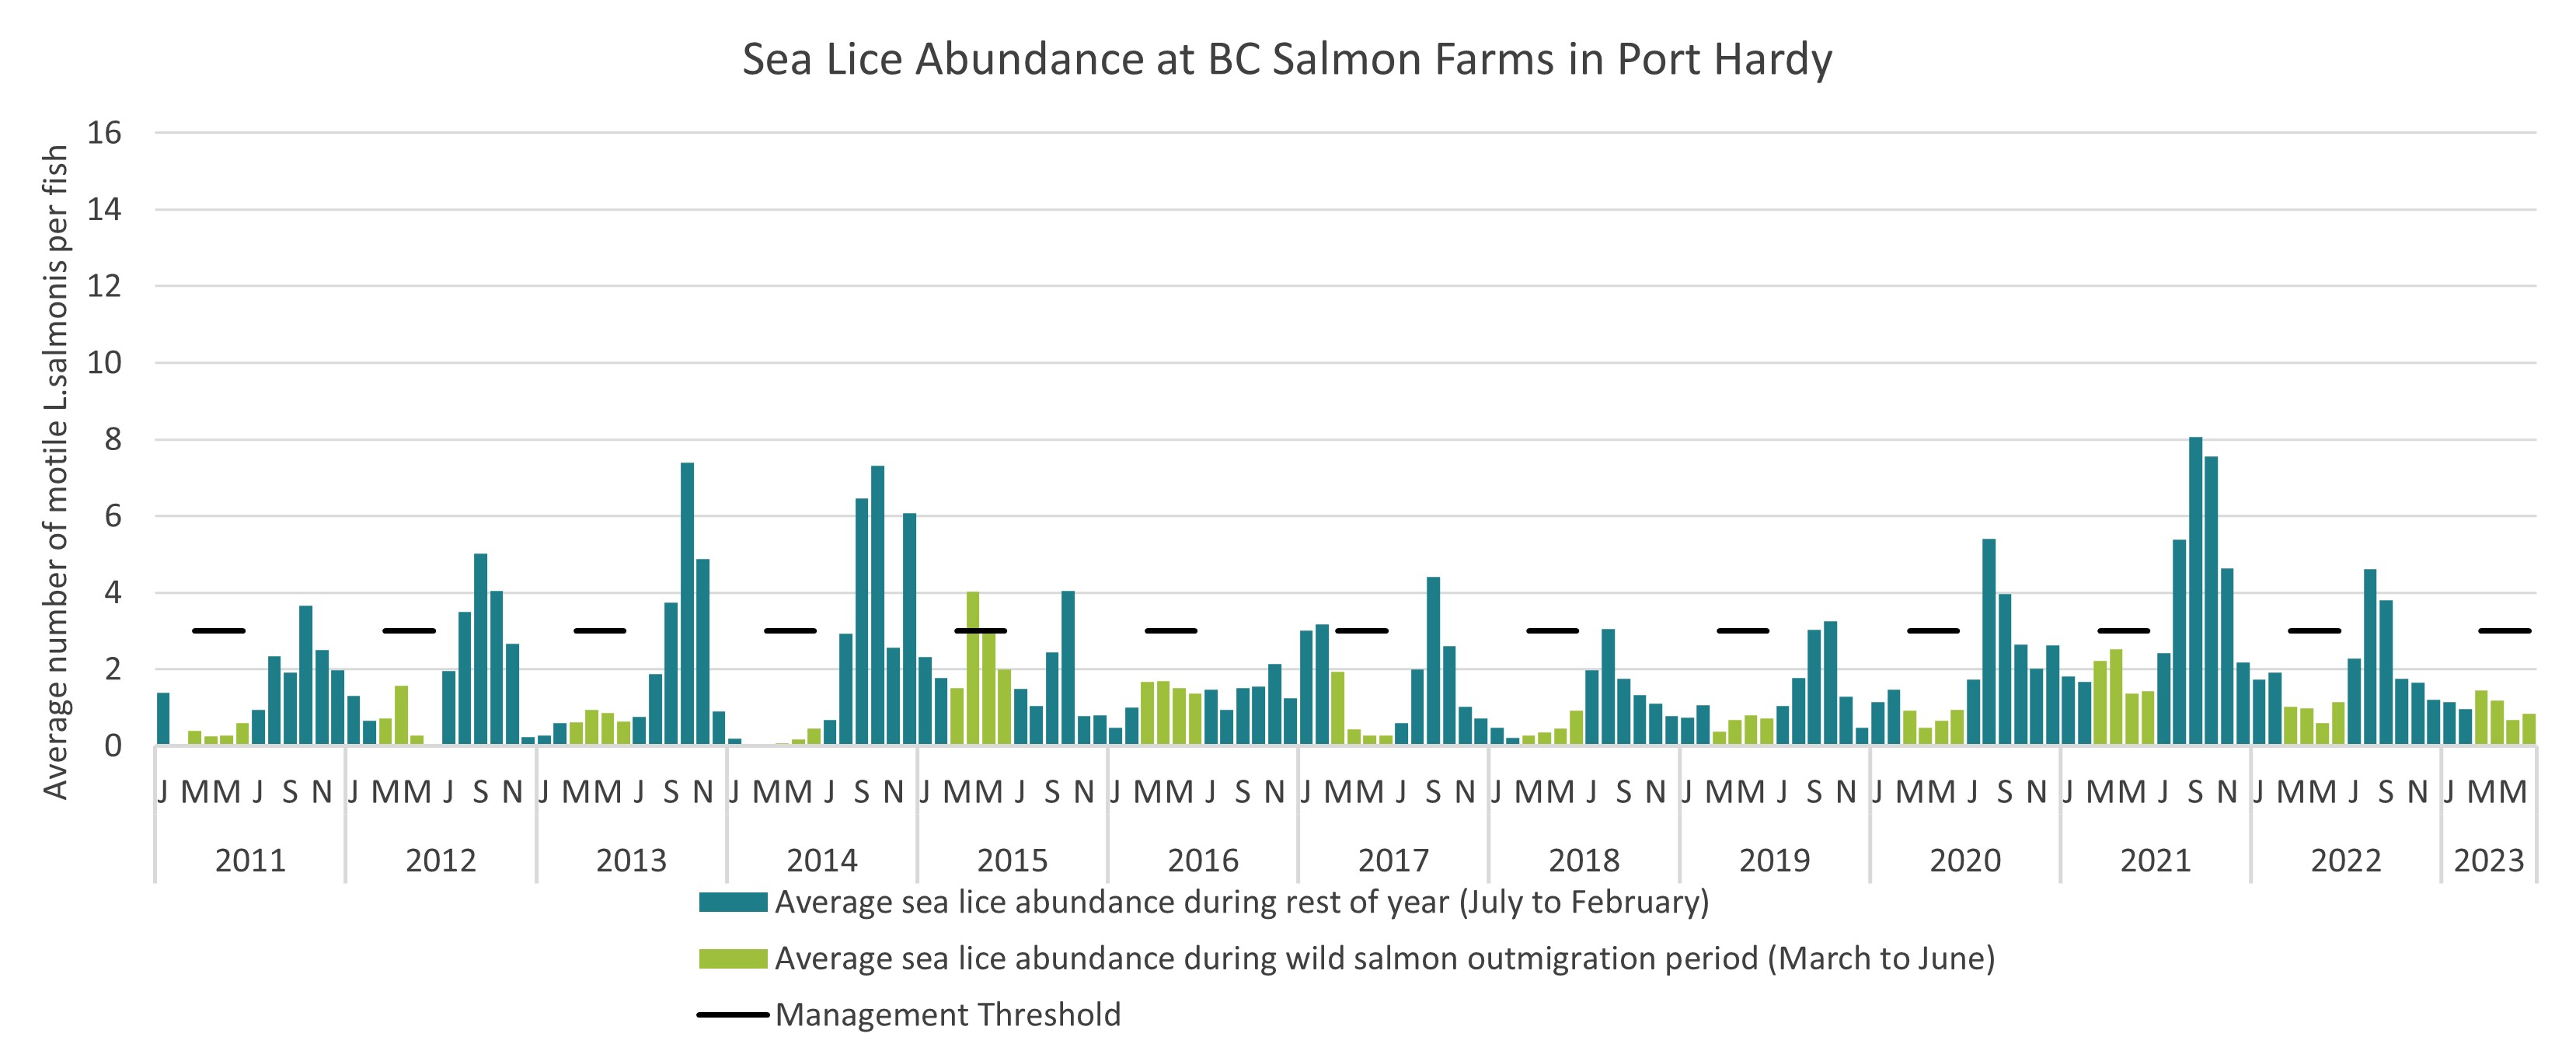 Sea Lice Abundance at BC Salmon Farms in the Port Hardy area, 2011 to 2023